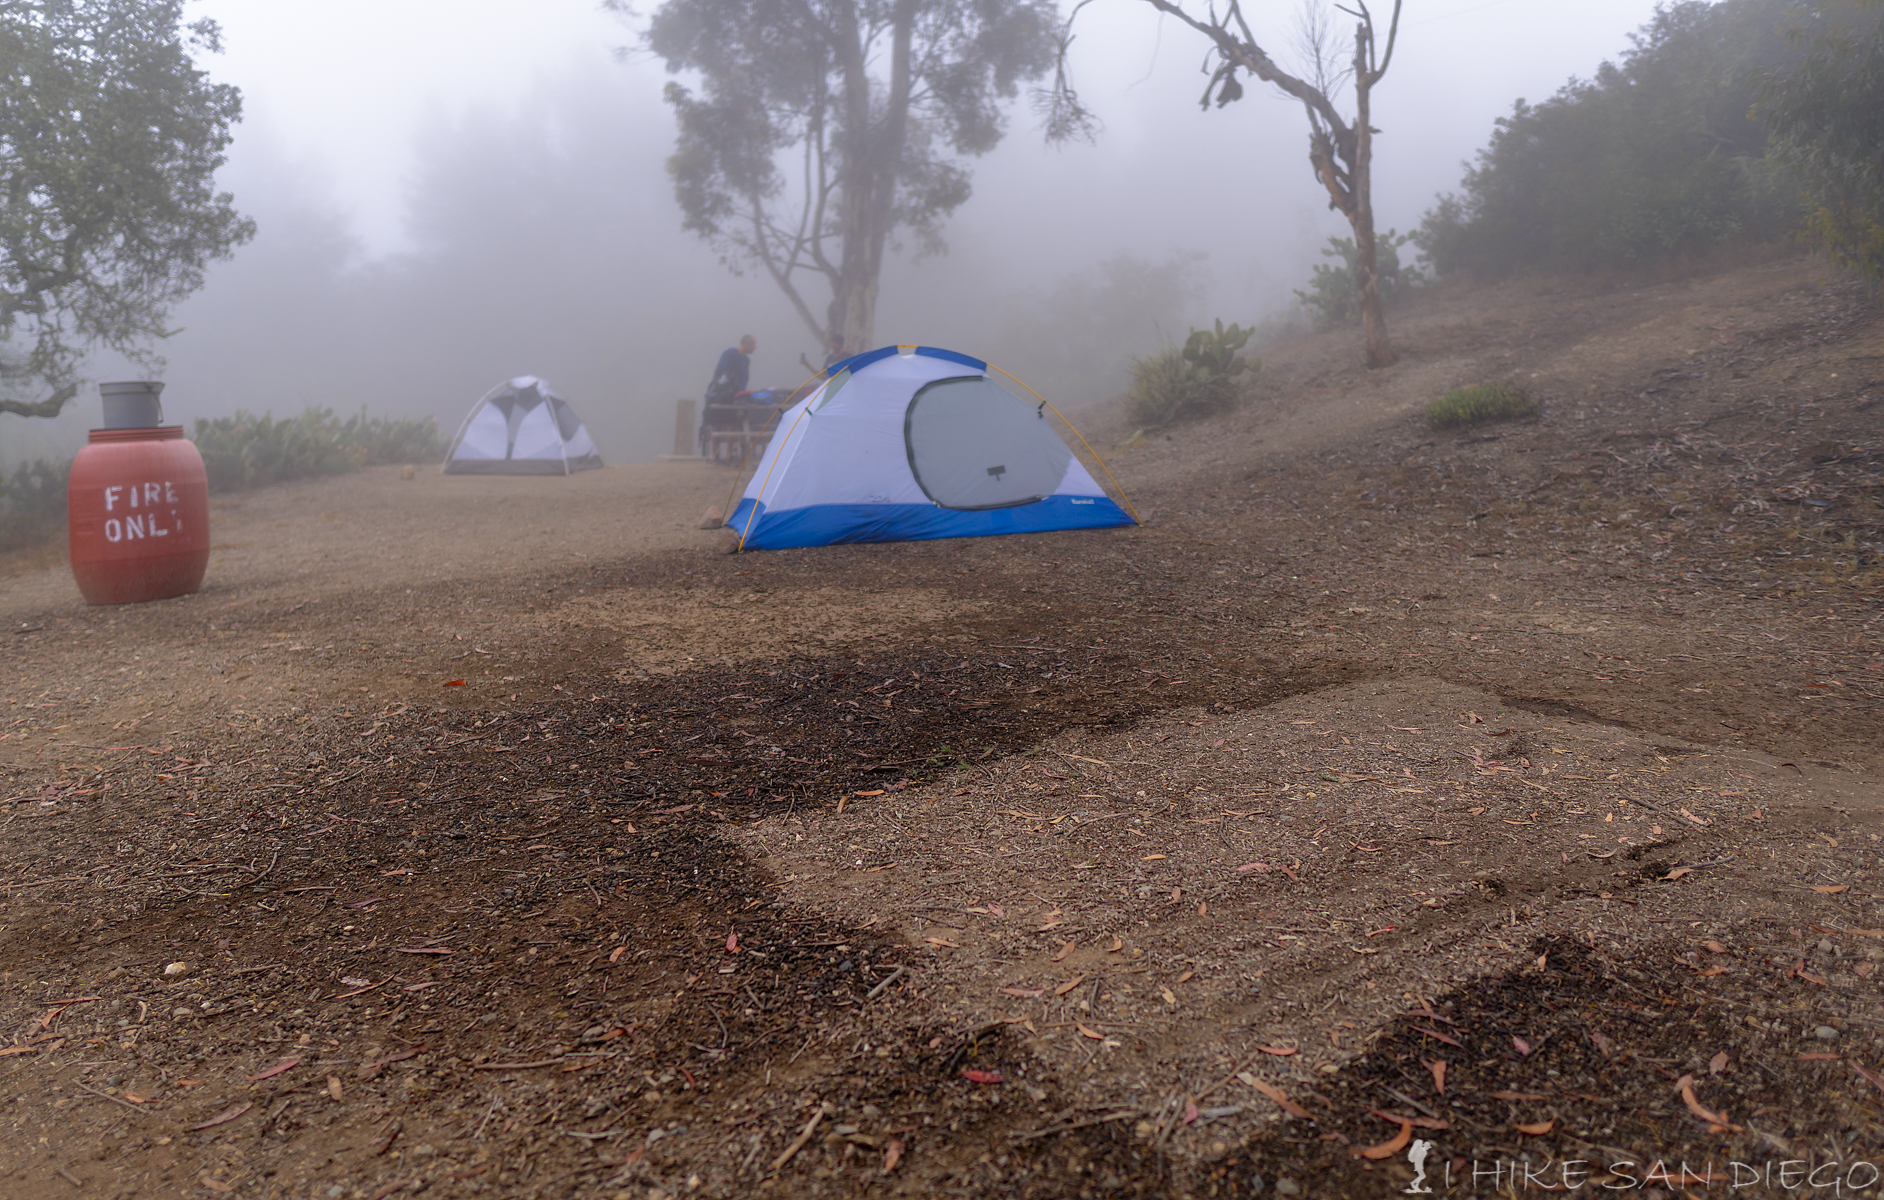 Getting dripped on in Blackjack Campgrounds on the Trans Catalina Island Trail